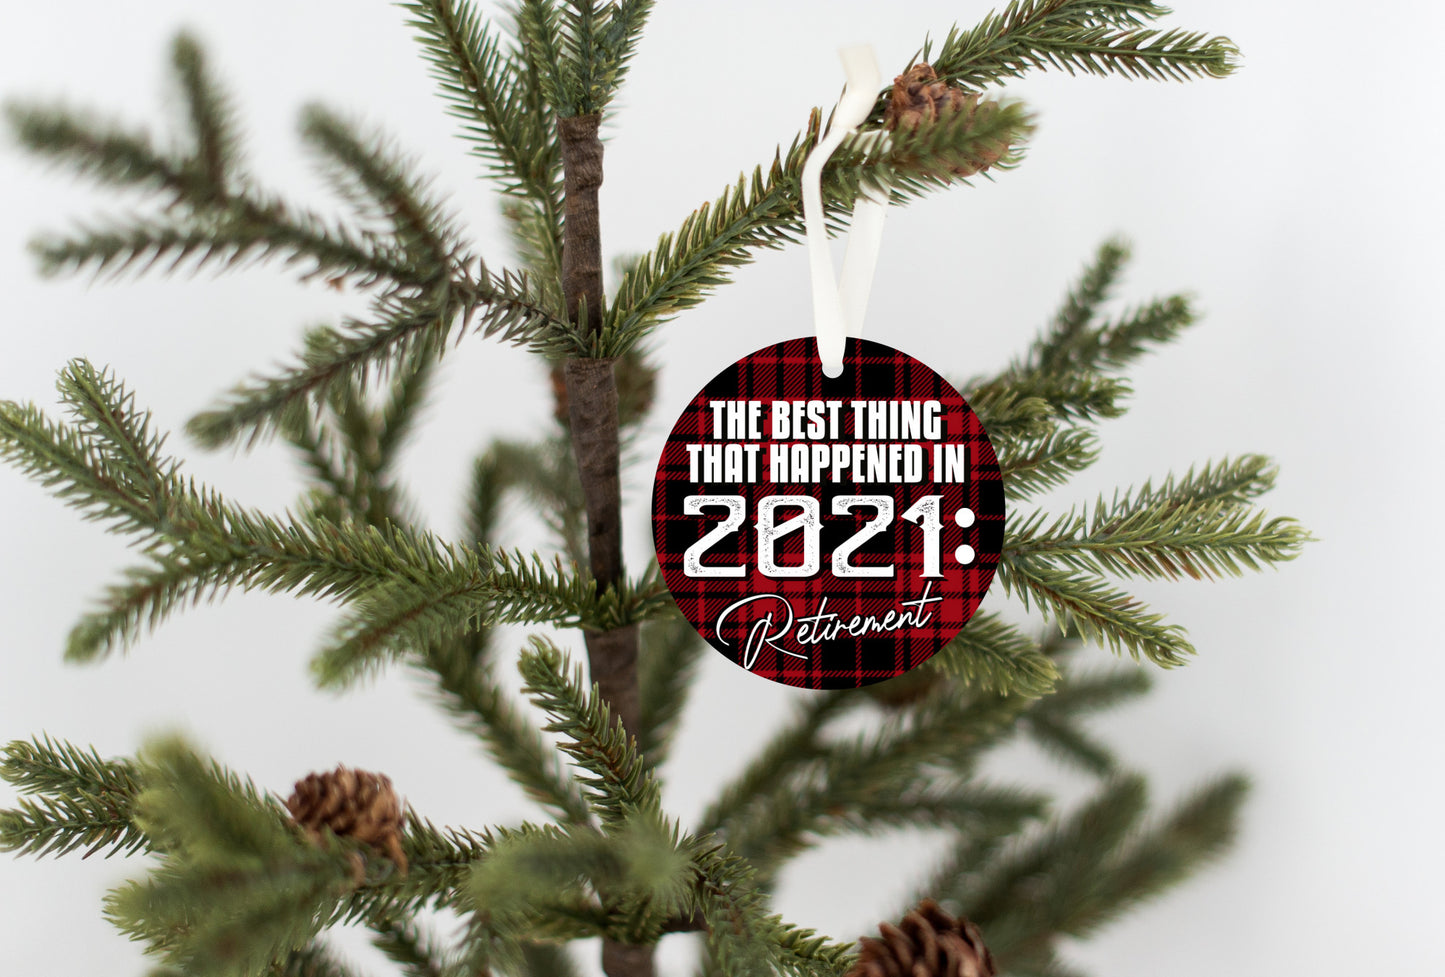 The Best Thing That Happened In 2021 Retirement Holiday Ornament